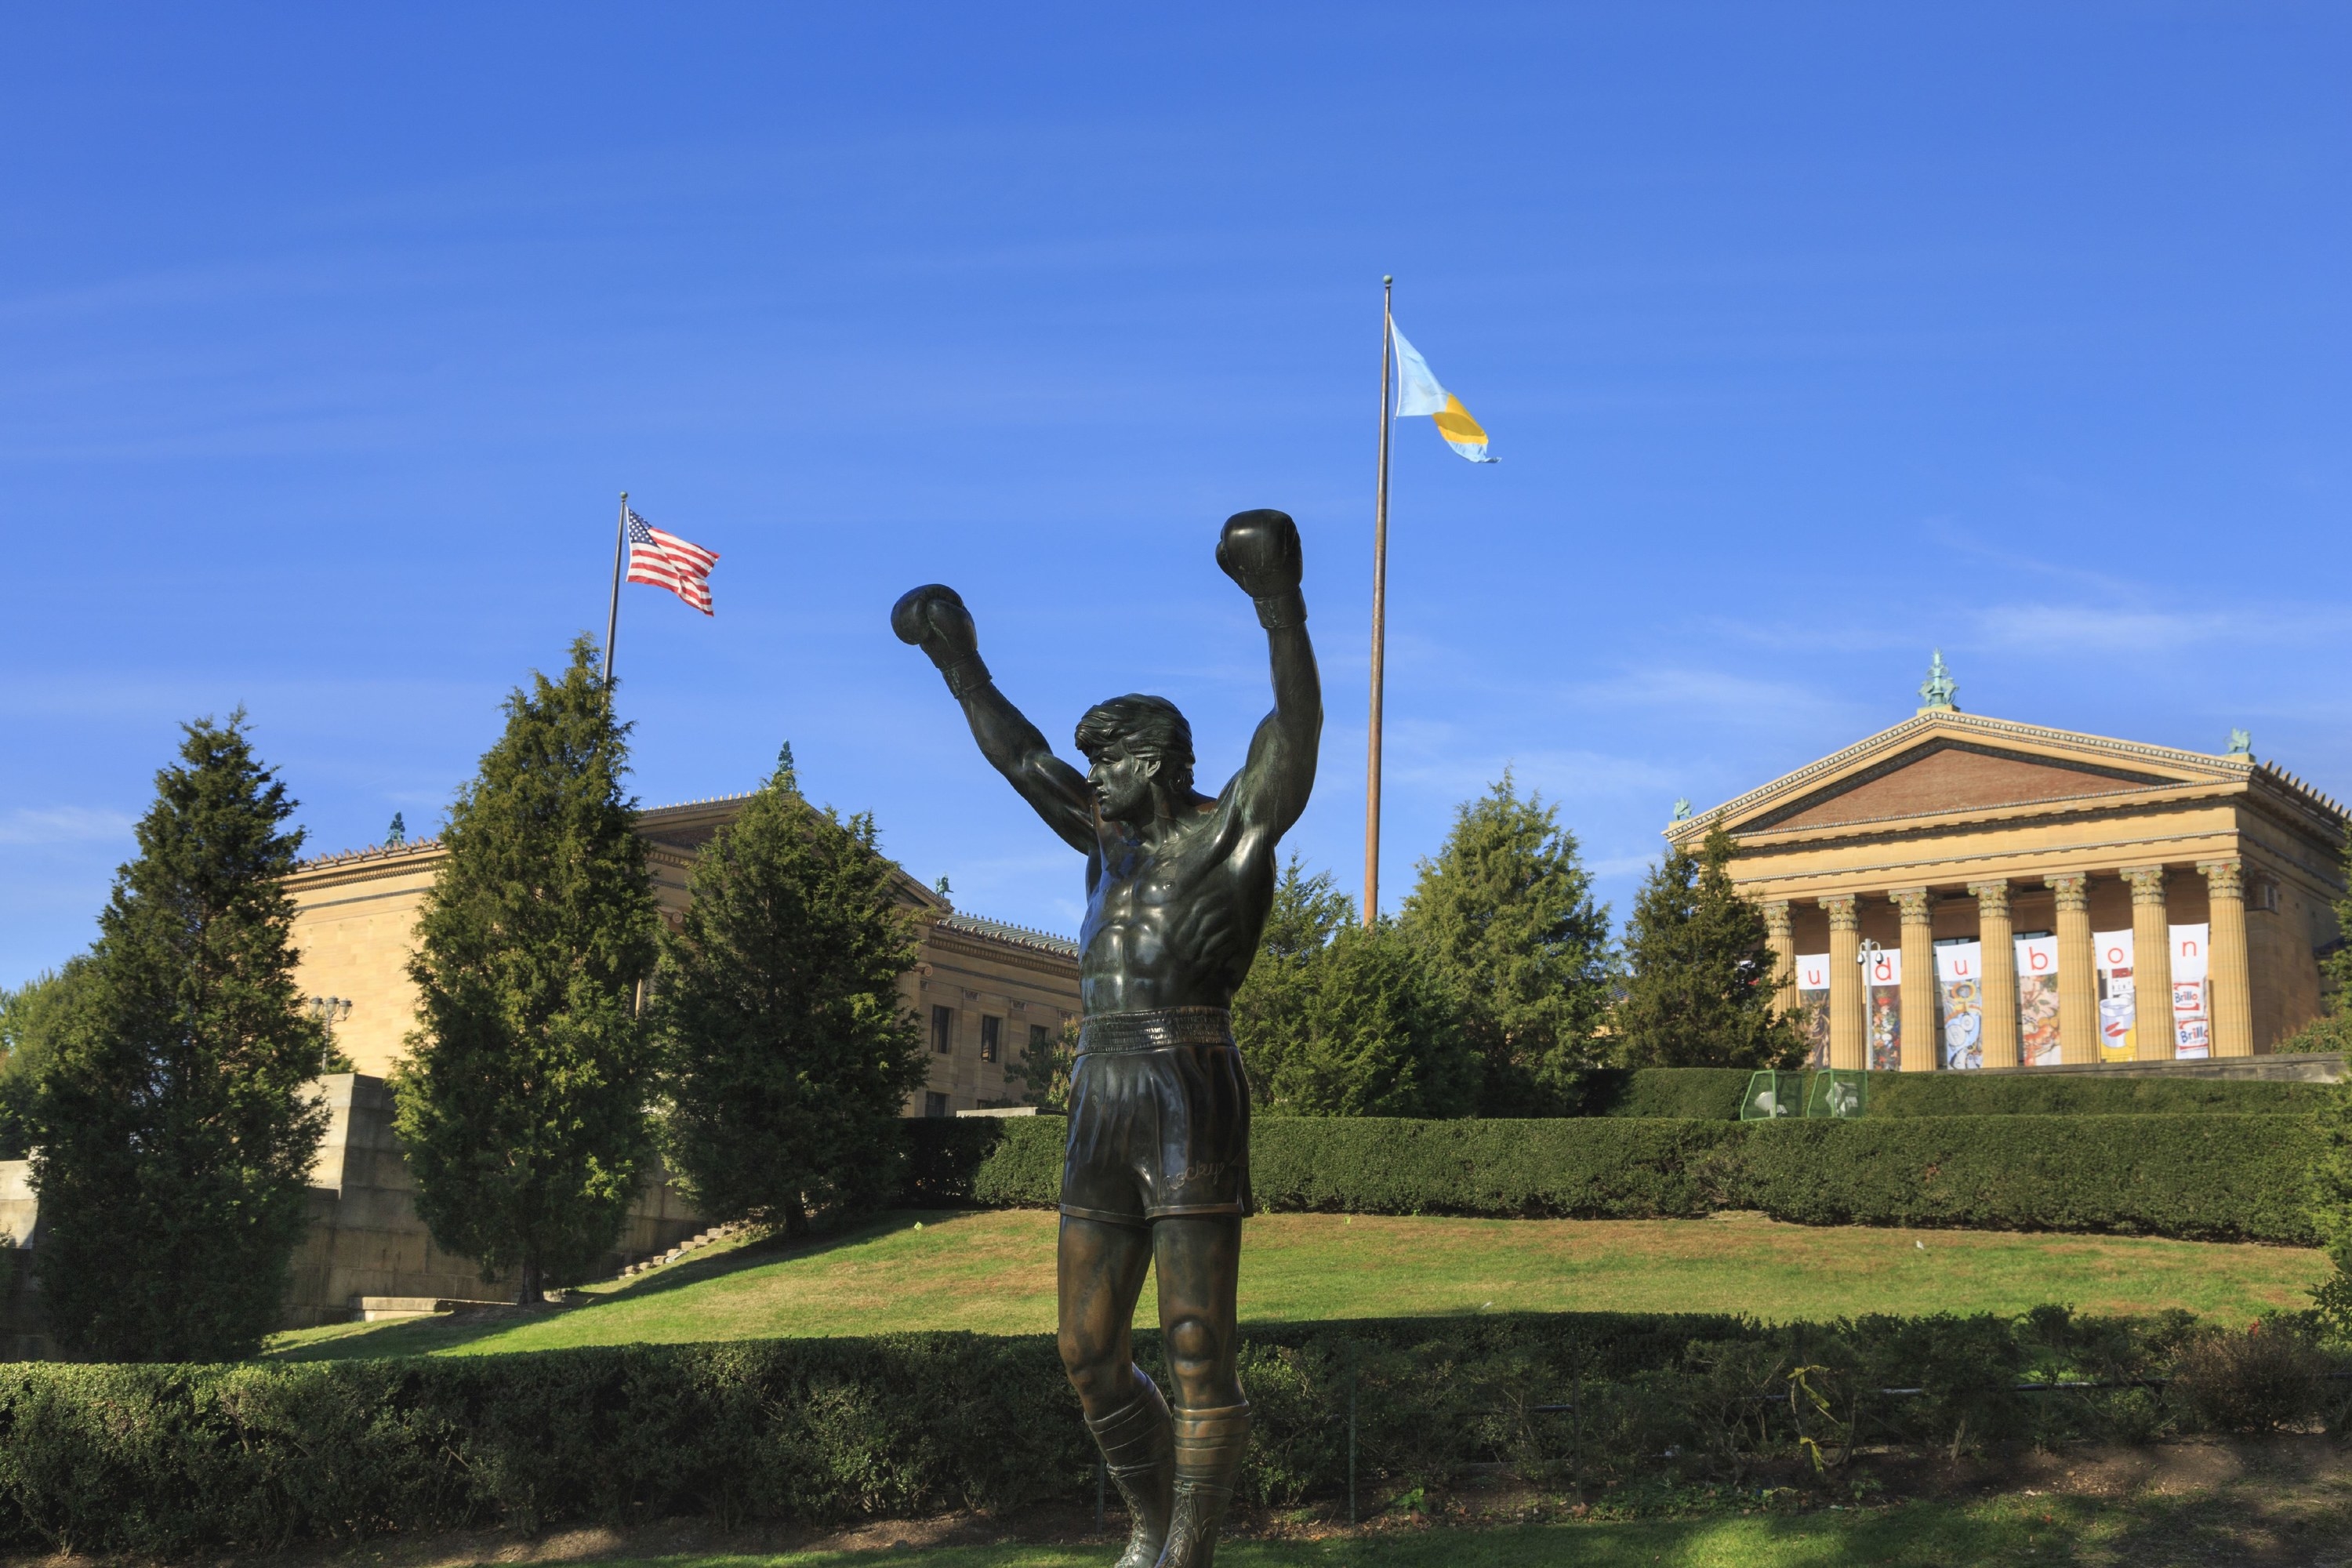 The Statue of Rocky Balboa (played by Sylvester Stallone) outside of the Philadelphia Museum of Art